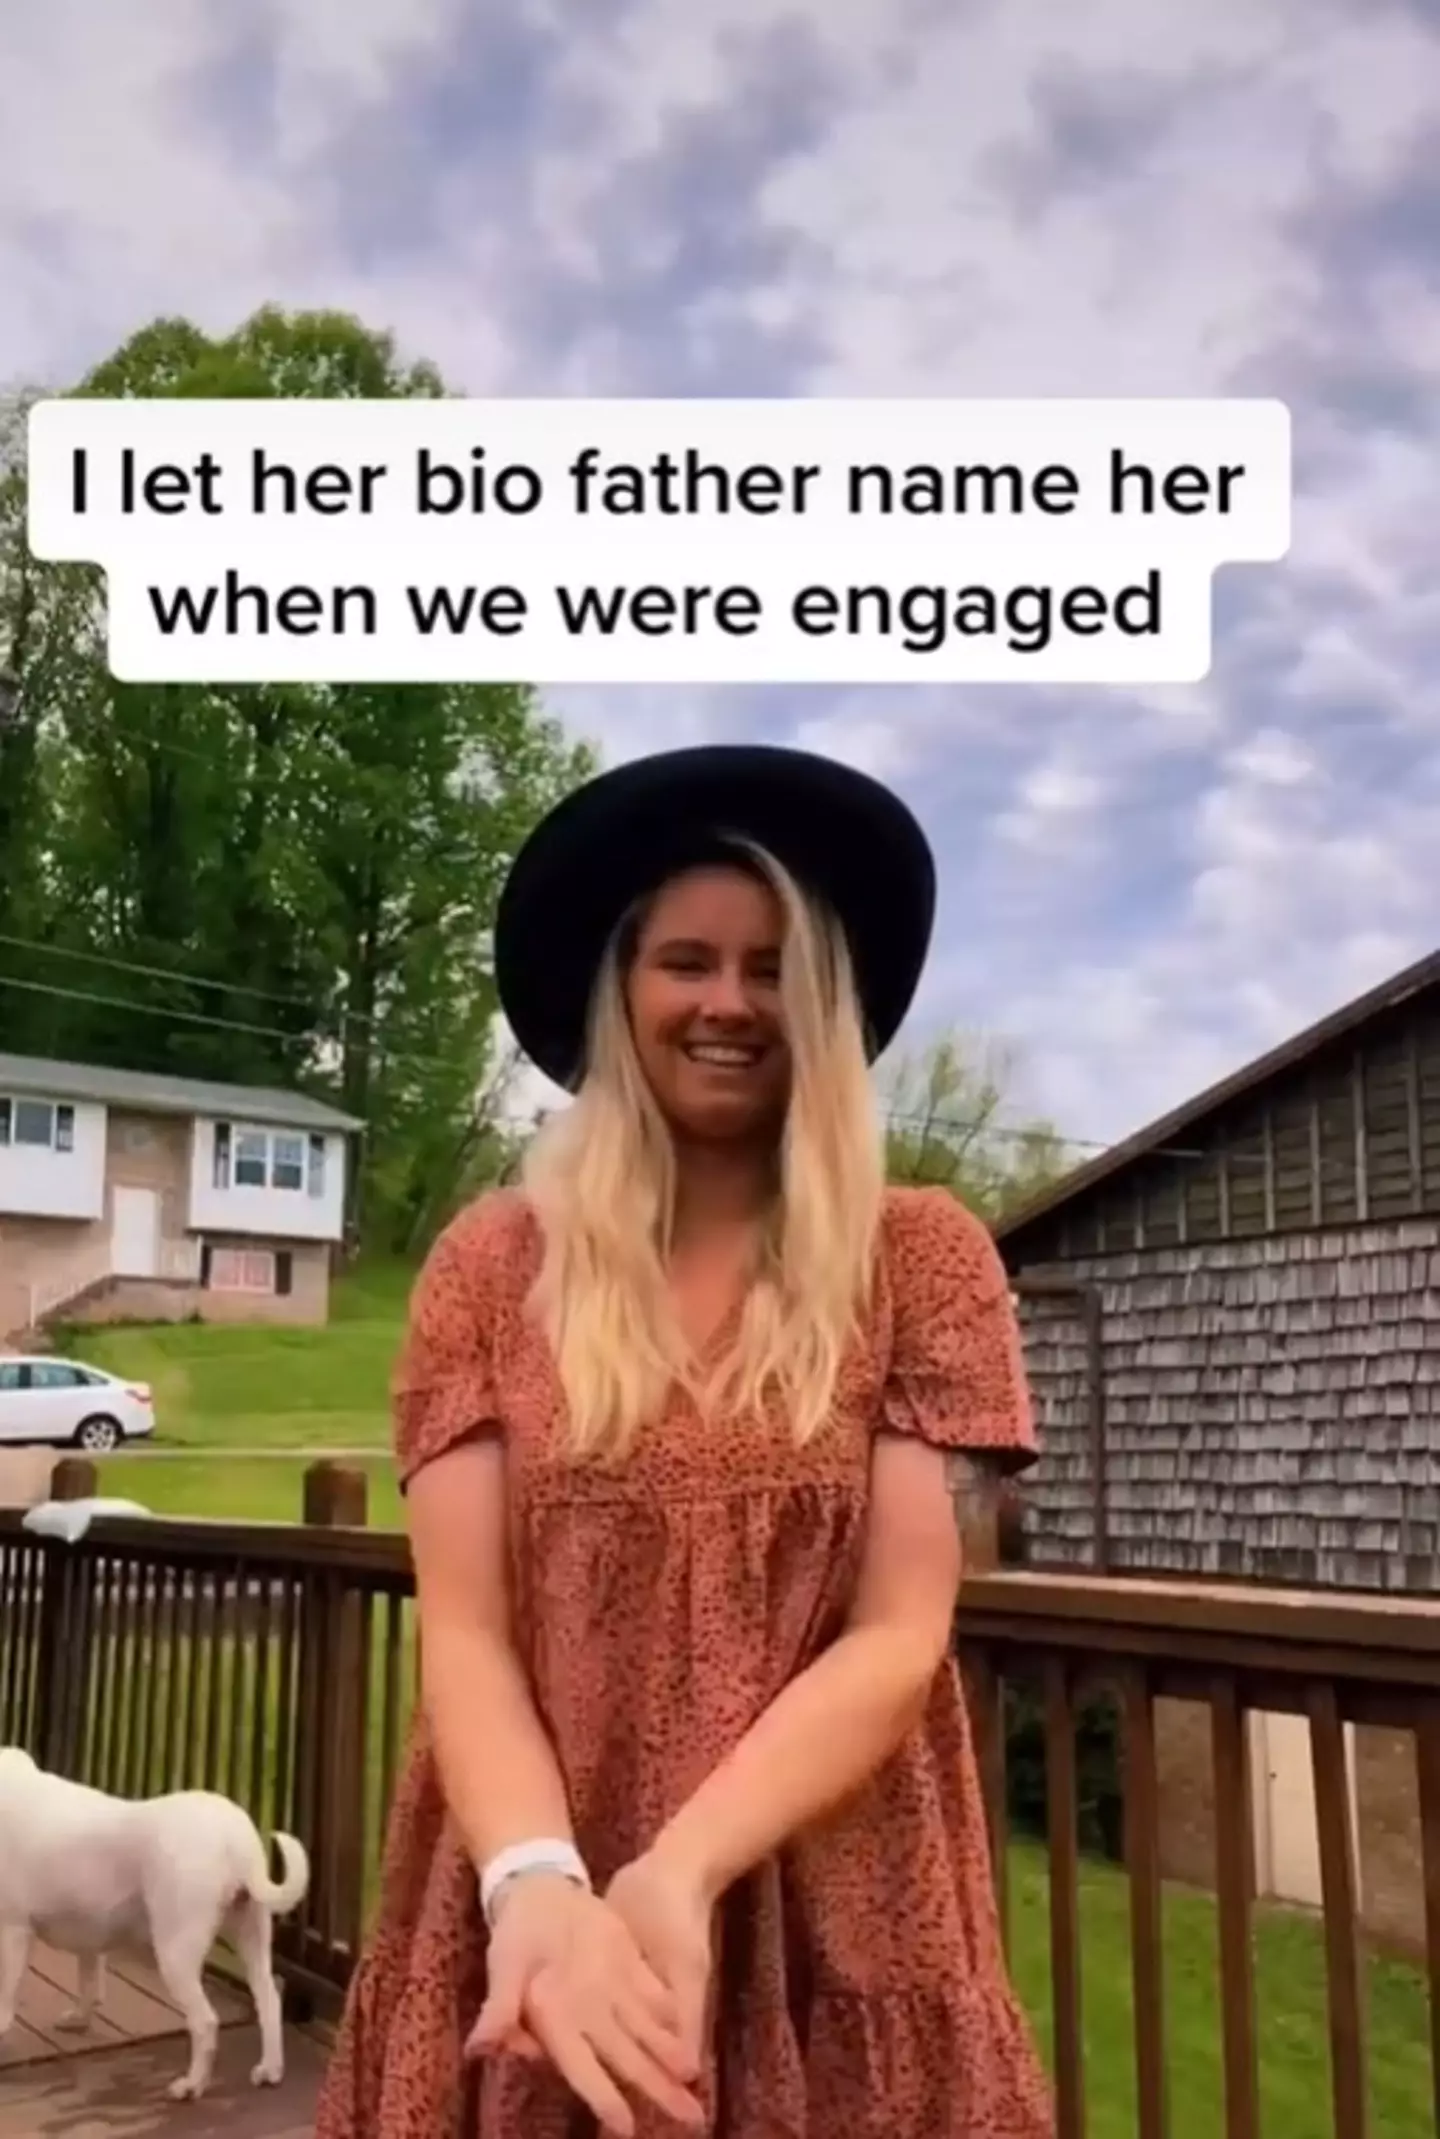 The mum explained why she'd changed her daughter's name.